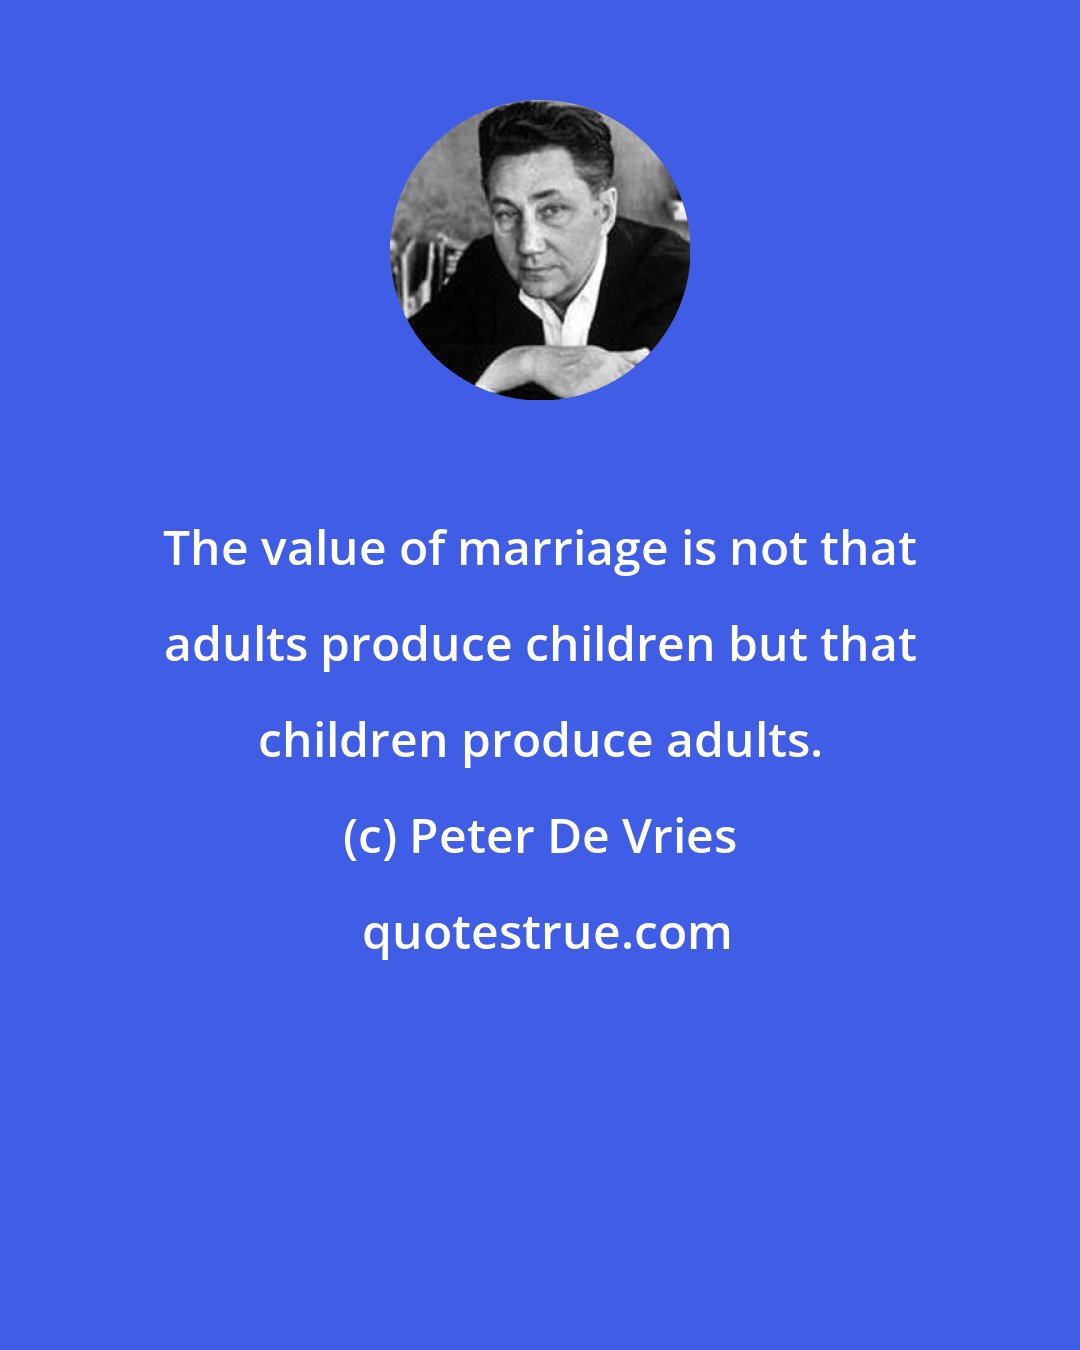 Peter De Vries: The value of marriage is not that adults produce children but that children produce adults.